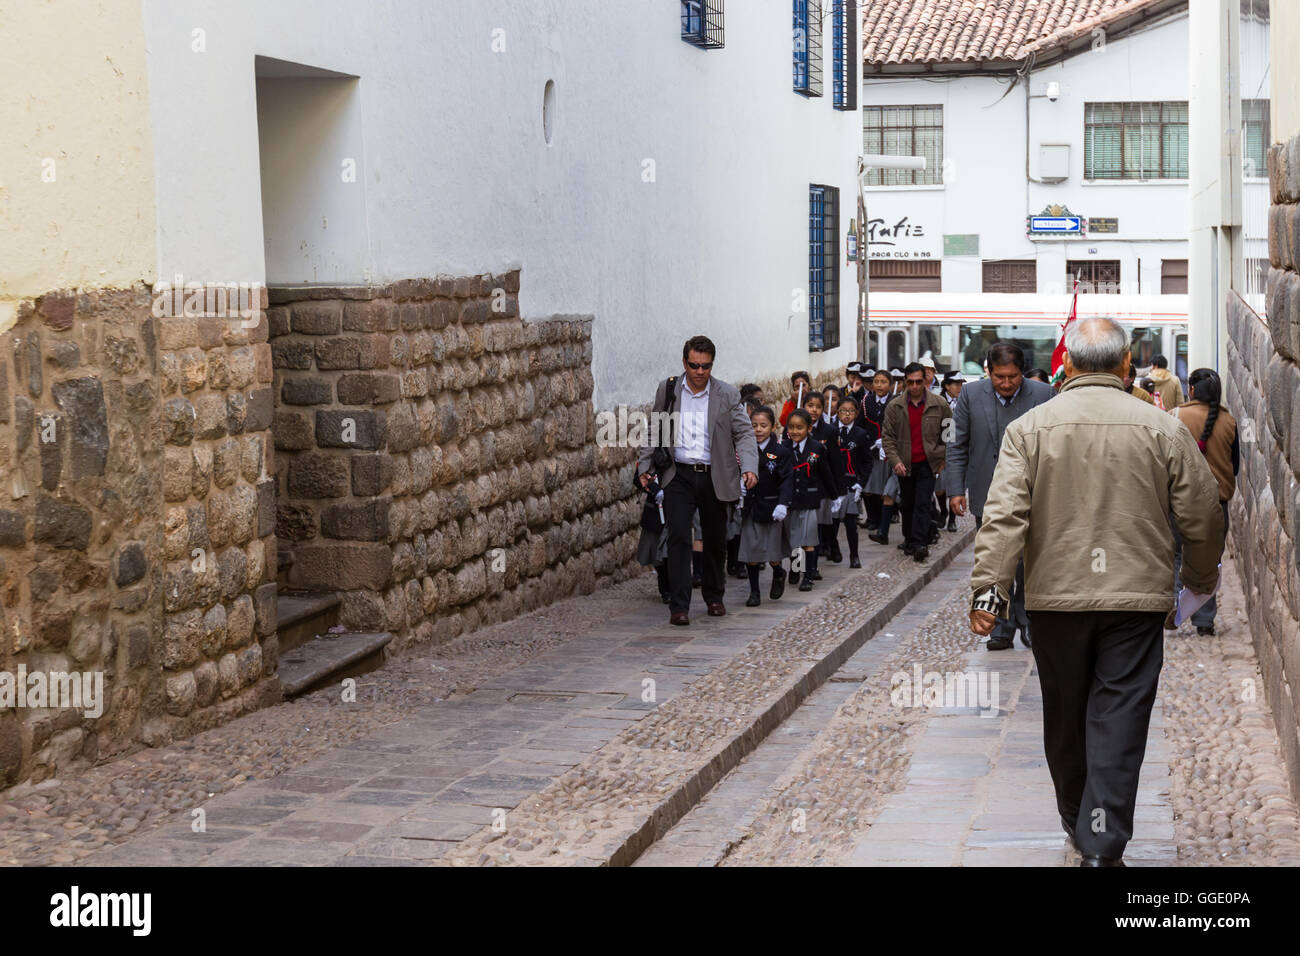 Cusco, Peru - May 12 : Children walking in a row thru alleyways to get to the Plaza de Armas for a Policia Escolar activity. May Stock Photo